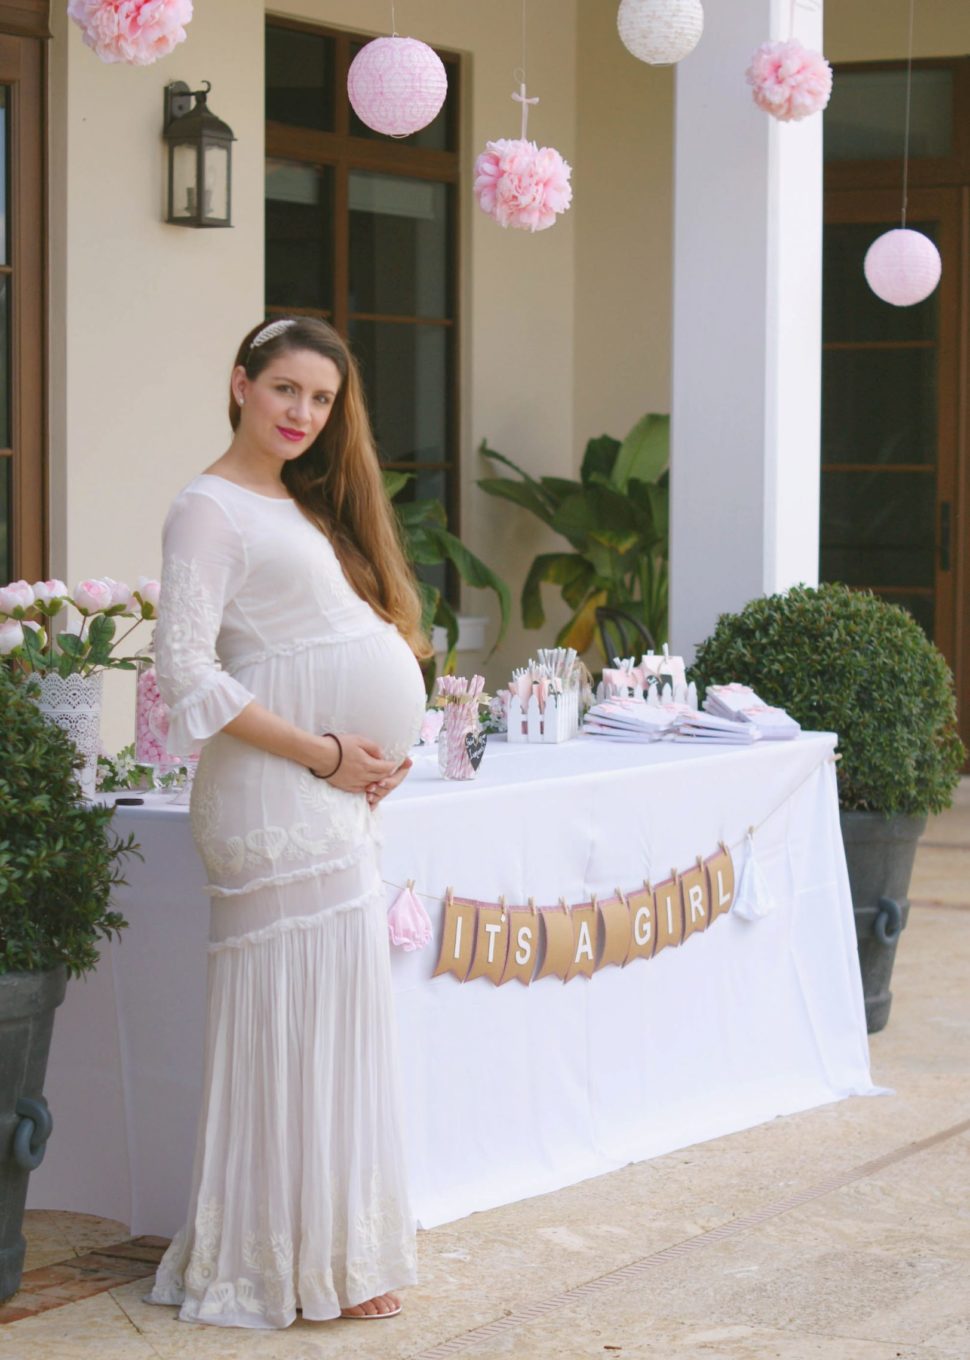 Medium Size of Baby Shower:maternity Clothes H&m Showing Lsi Keywords For Baby Shower Dresses Maternity Evening Gowns Non Maternity Dresses For Baby Shower Maternity Blouses For Baby Shower Plus Size Maternity Dresses For Baby Shower What Should I Wear To My Baby Shower Plus Size Maternity Clothes